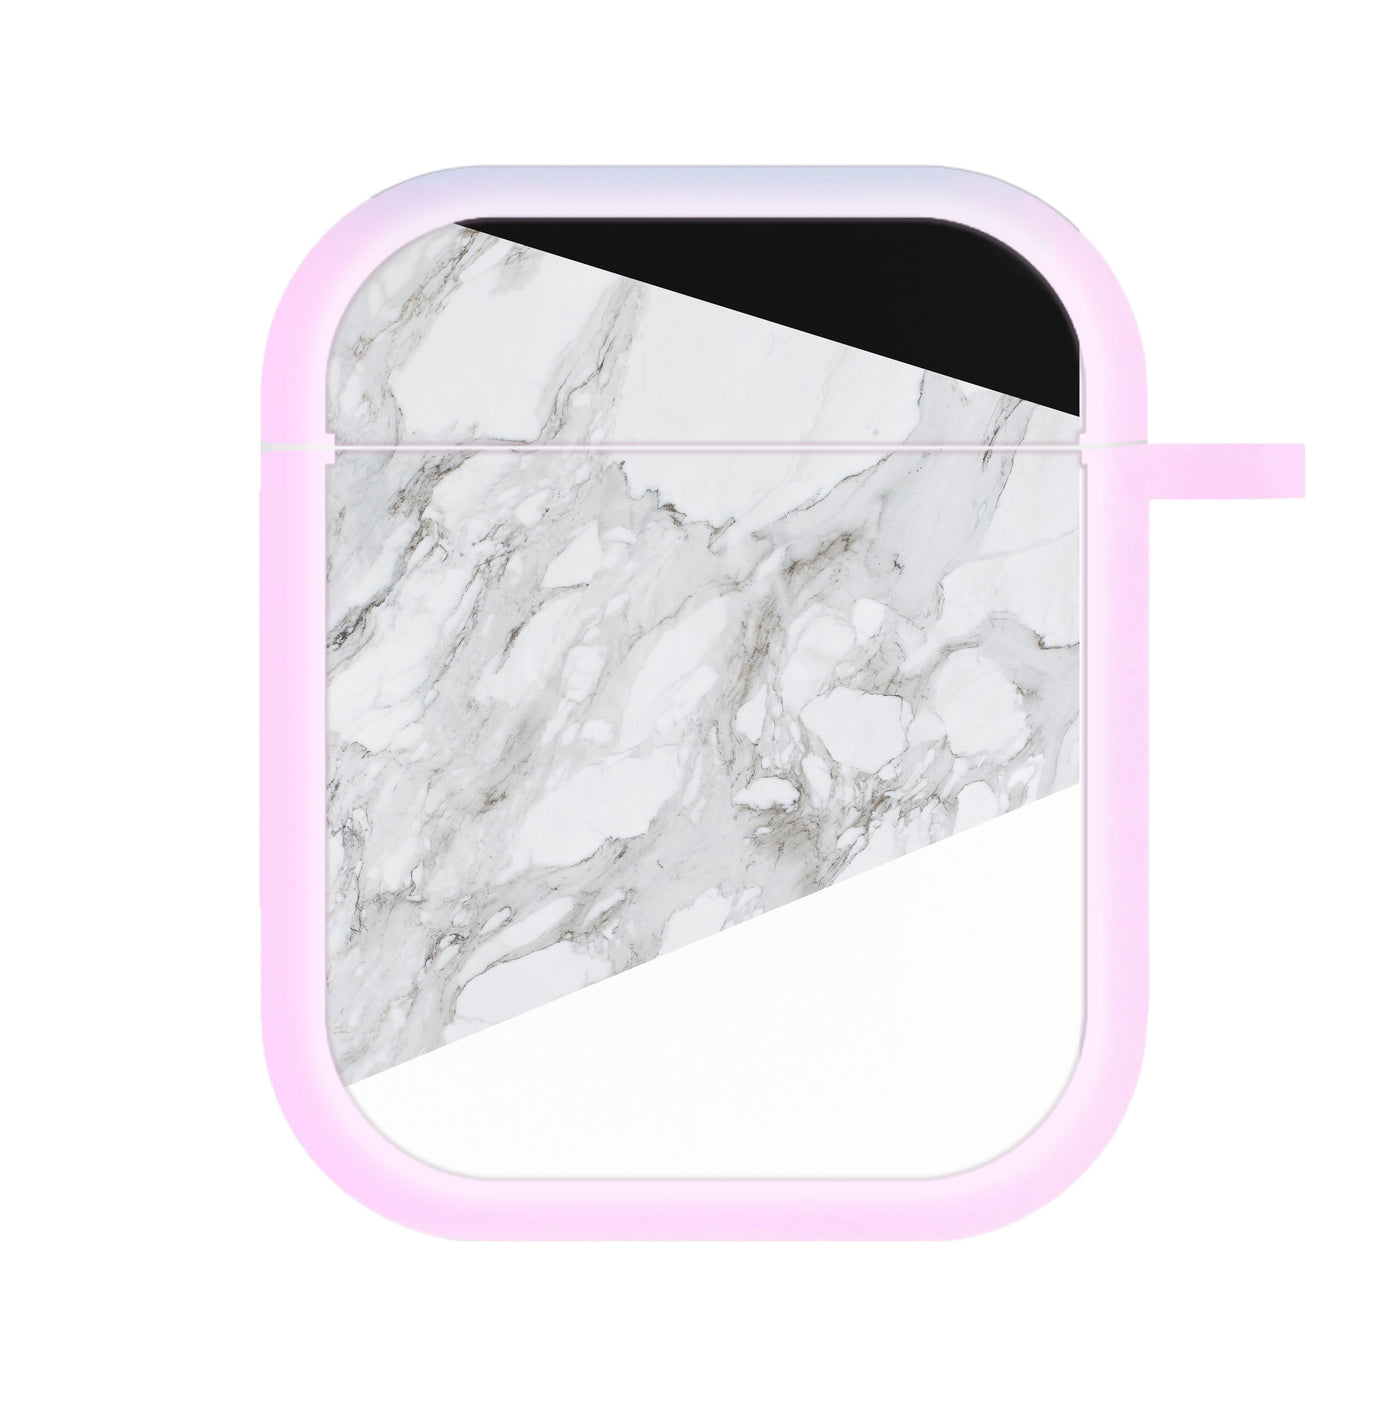 White, Black and Marble Pattern AirPods Case